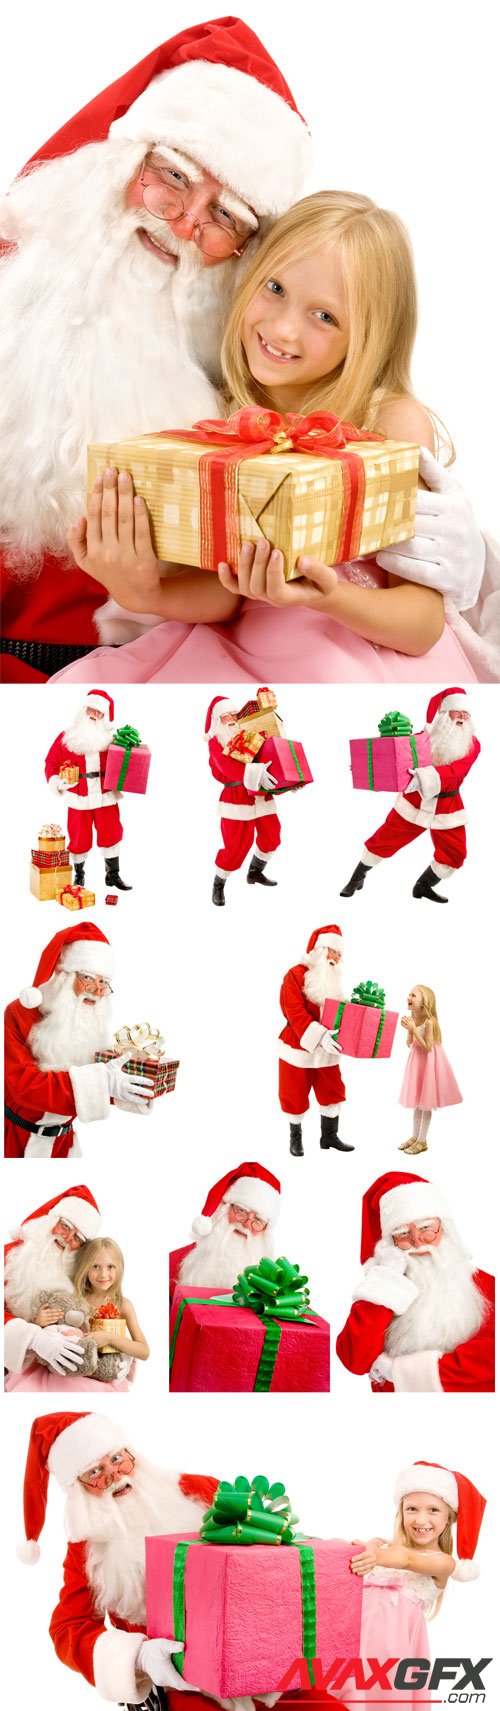 New Year and Christmas stock photos №33